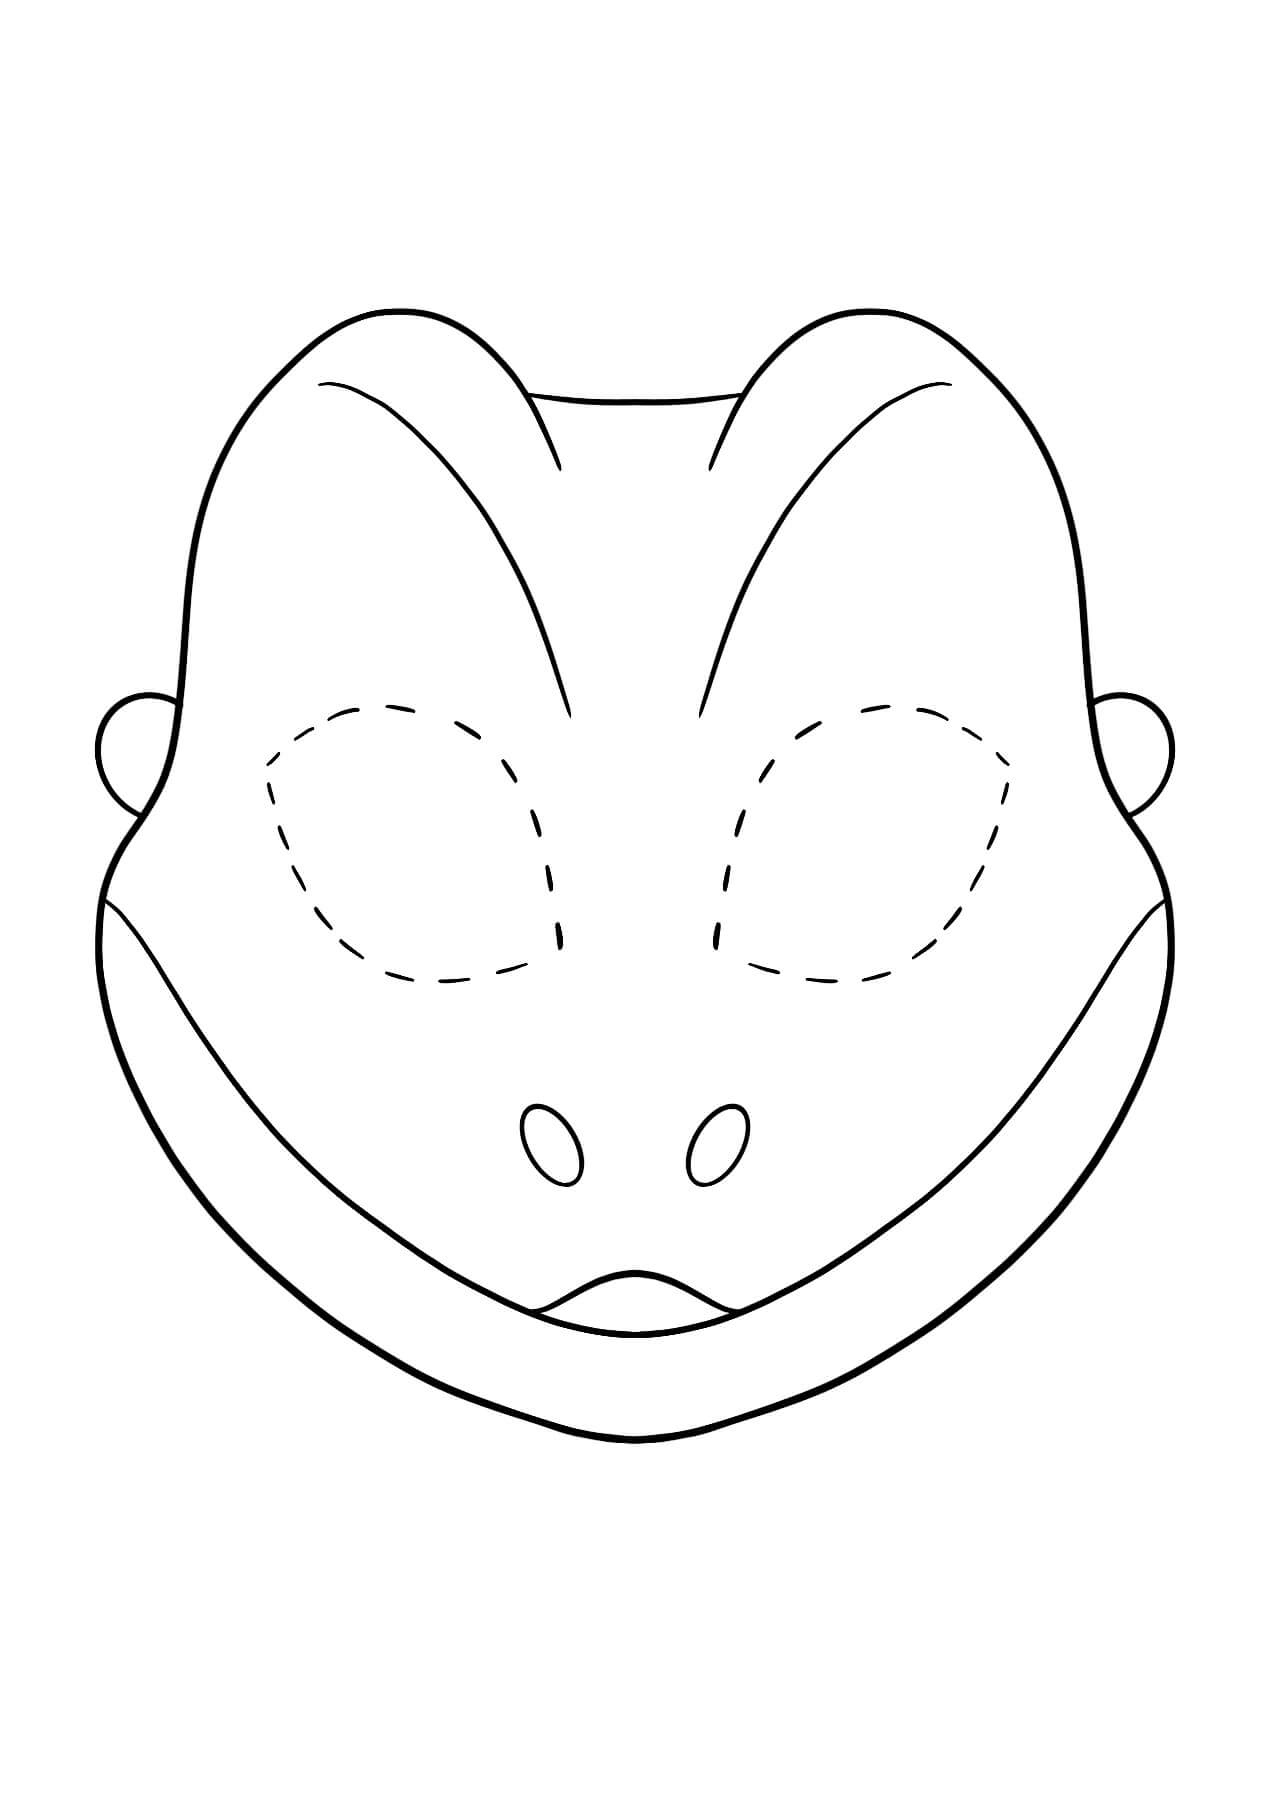 Easy Lizard Mask Coloring Page - Download, Print Or Color Online with regard to Free Printable Lizard Mask